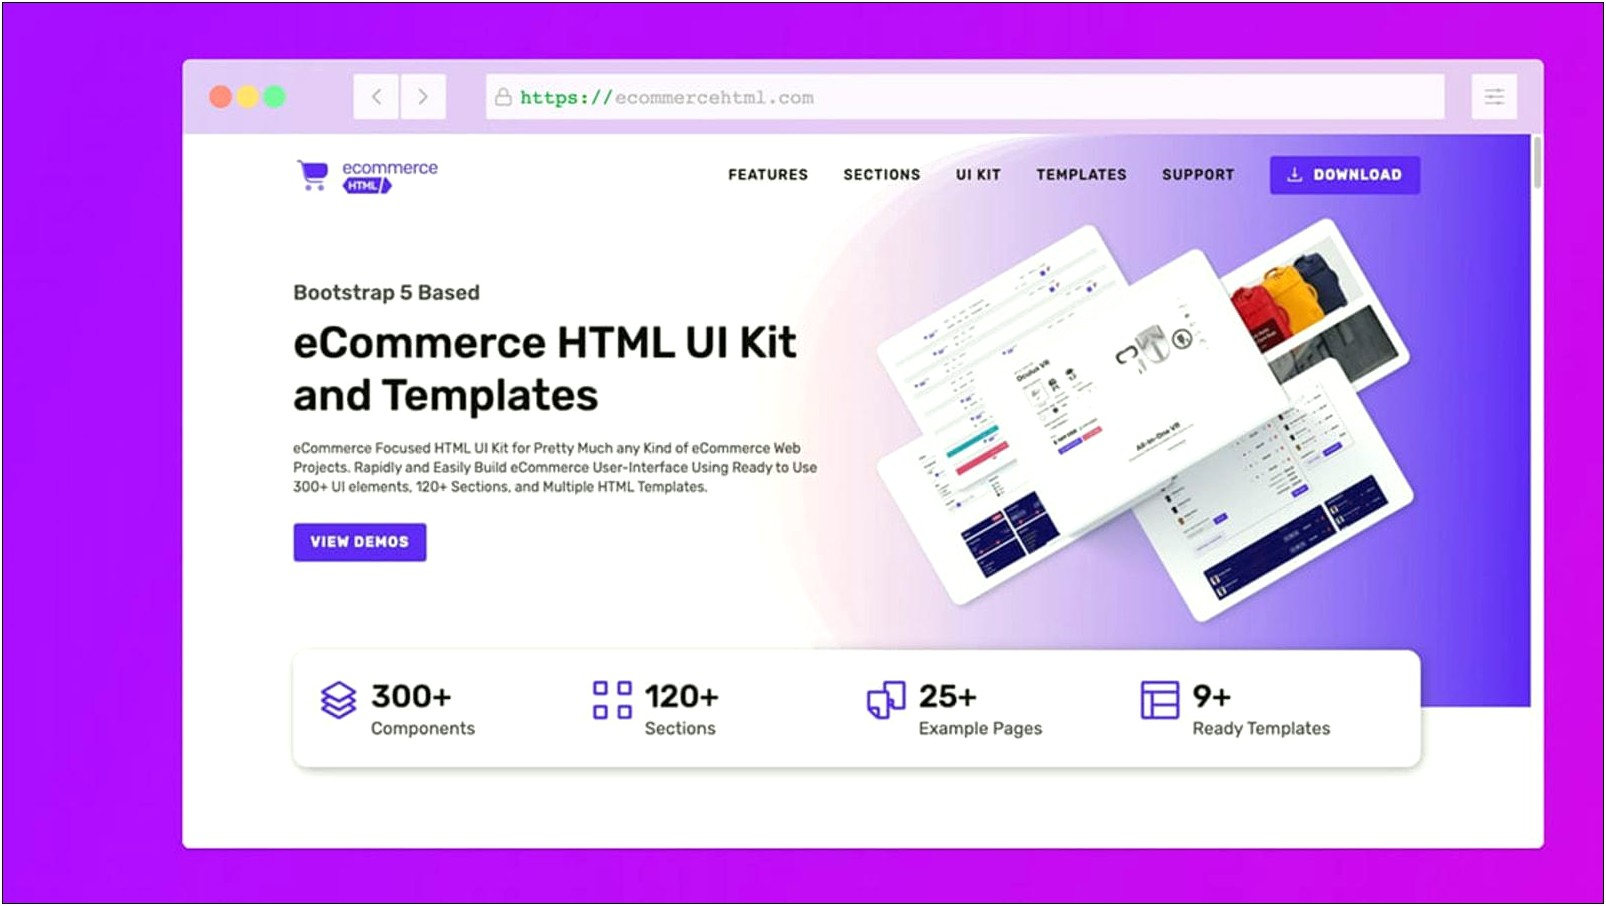 laravel-8-responsive-ecommerce-home-page-template-free-download